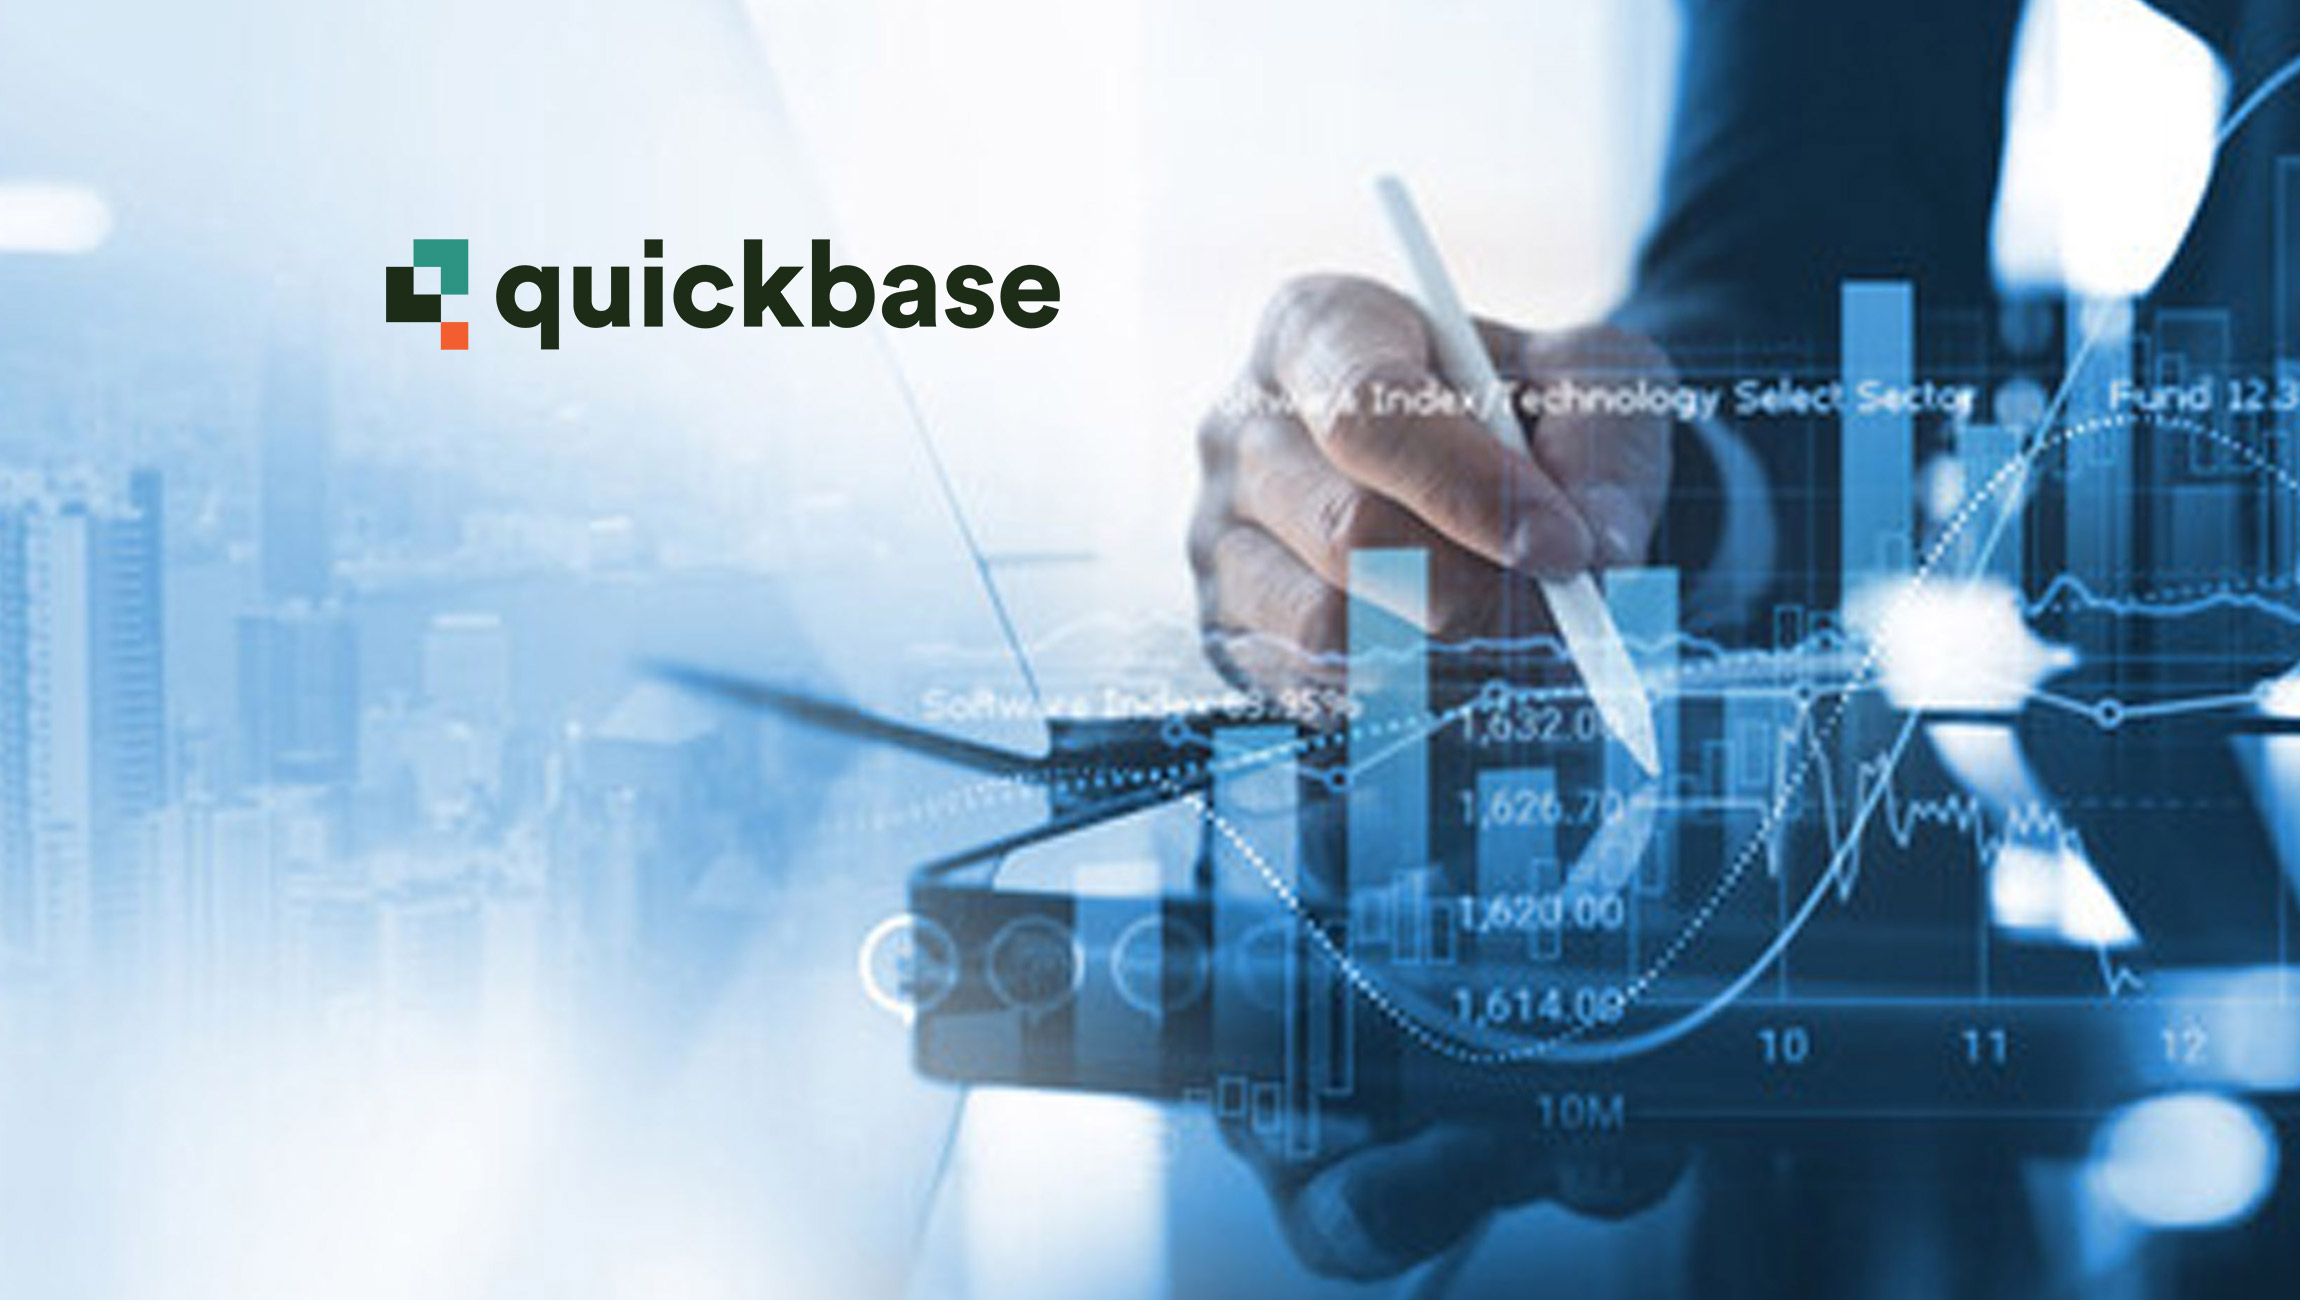 Quickbase Hits $200M Revenue, Demonstrating Profitability and Sustainable Growth